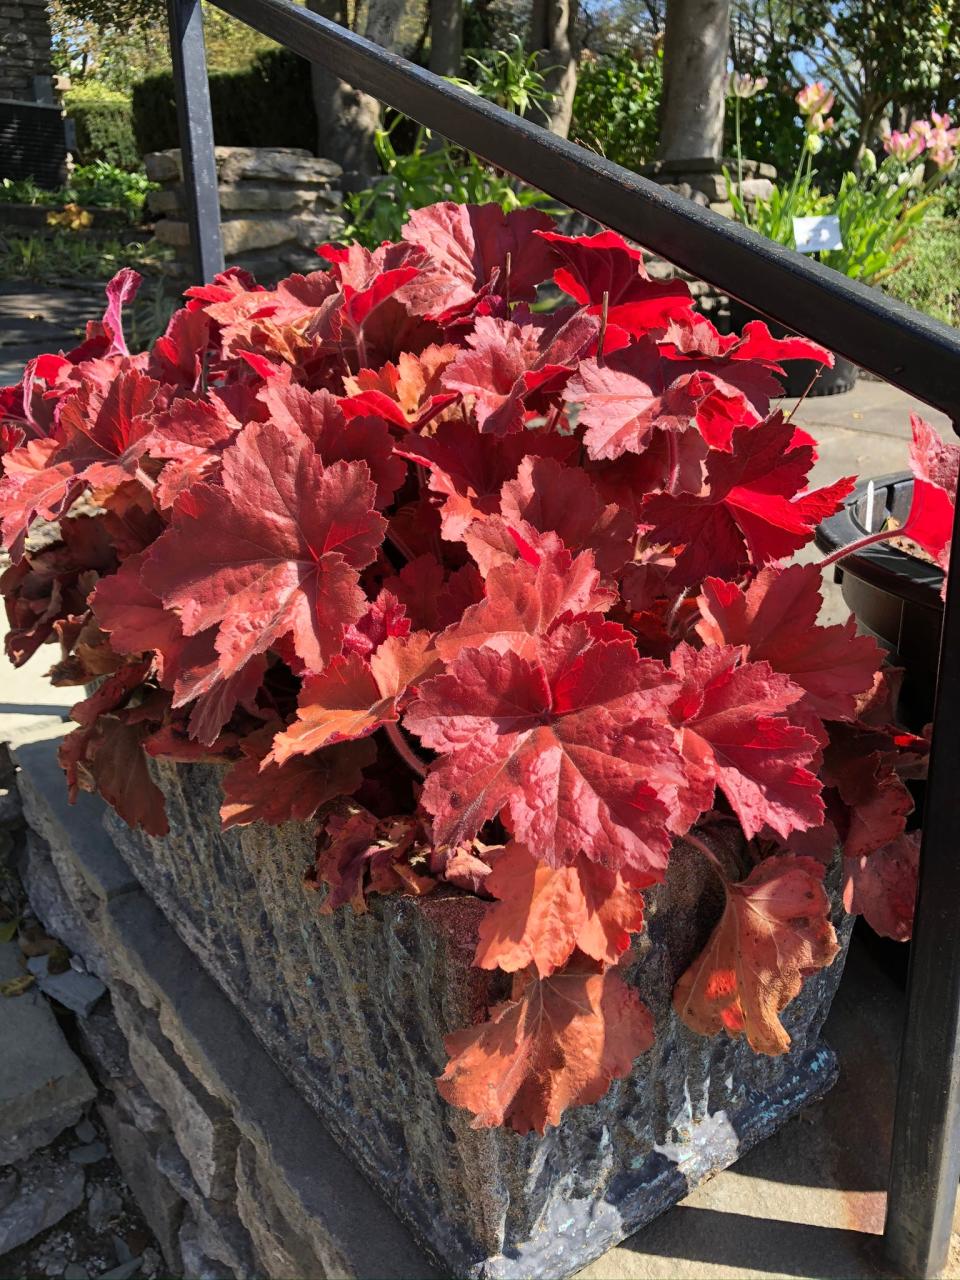 This specimen planting of 'Southern Comfort' coral bells has been growing in a container at Yew Dell Botanical Gardens for more than 10 years.